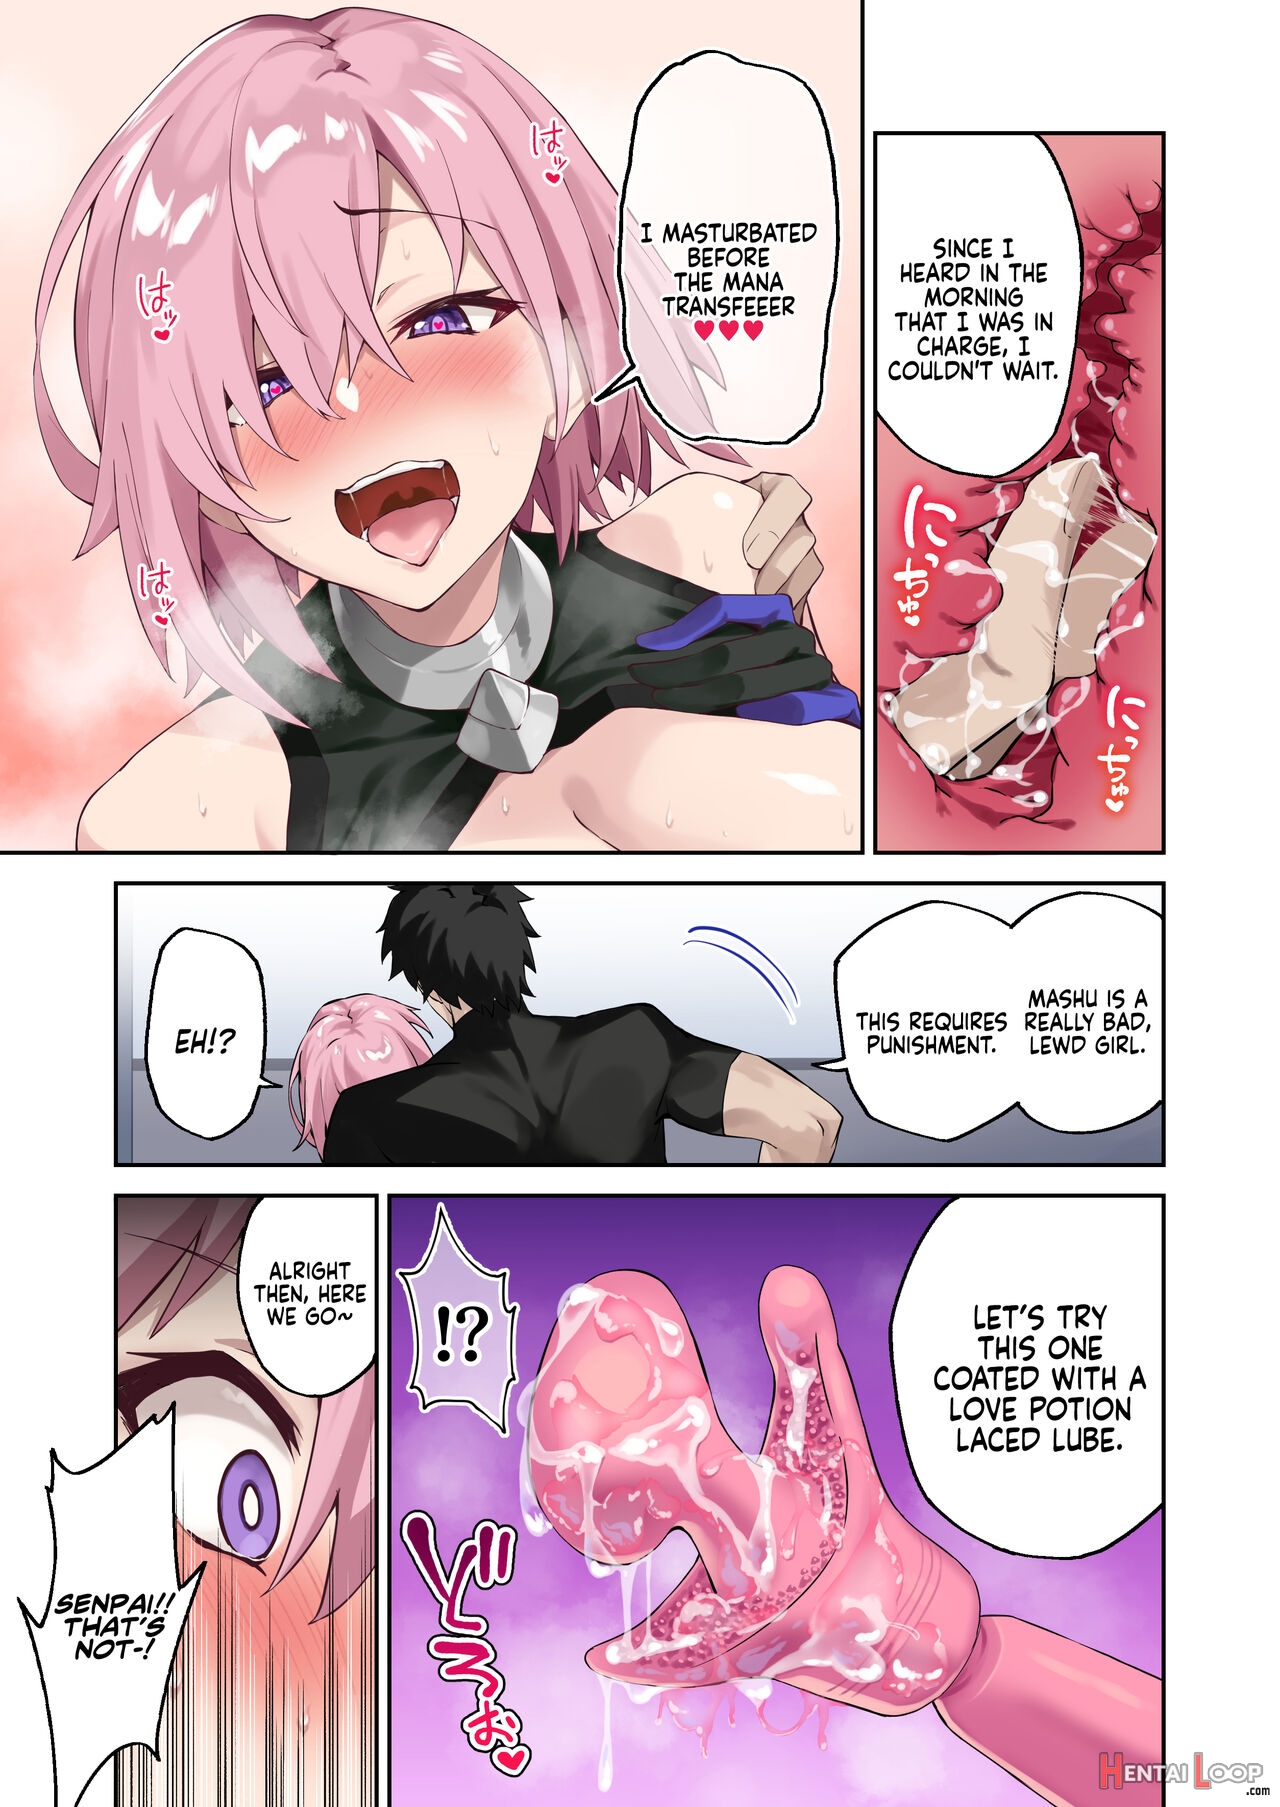 The Sex Life In Chaldea Is The Best -mana Transfer Compilation Book- page 5